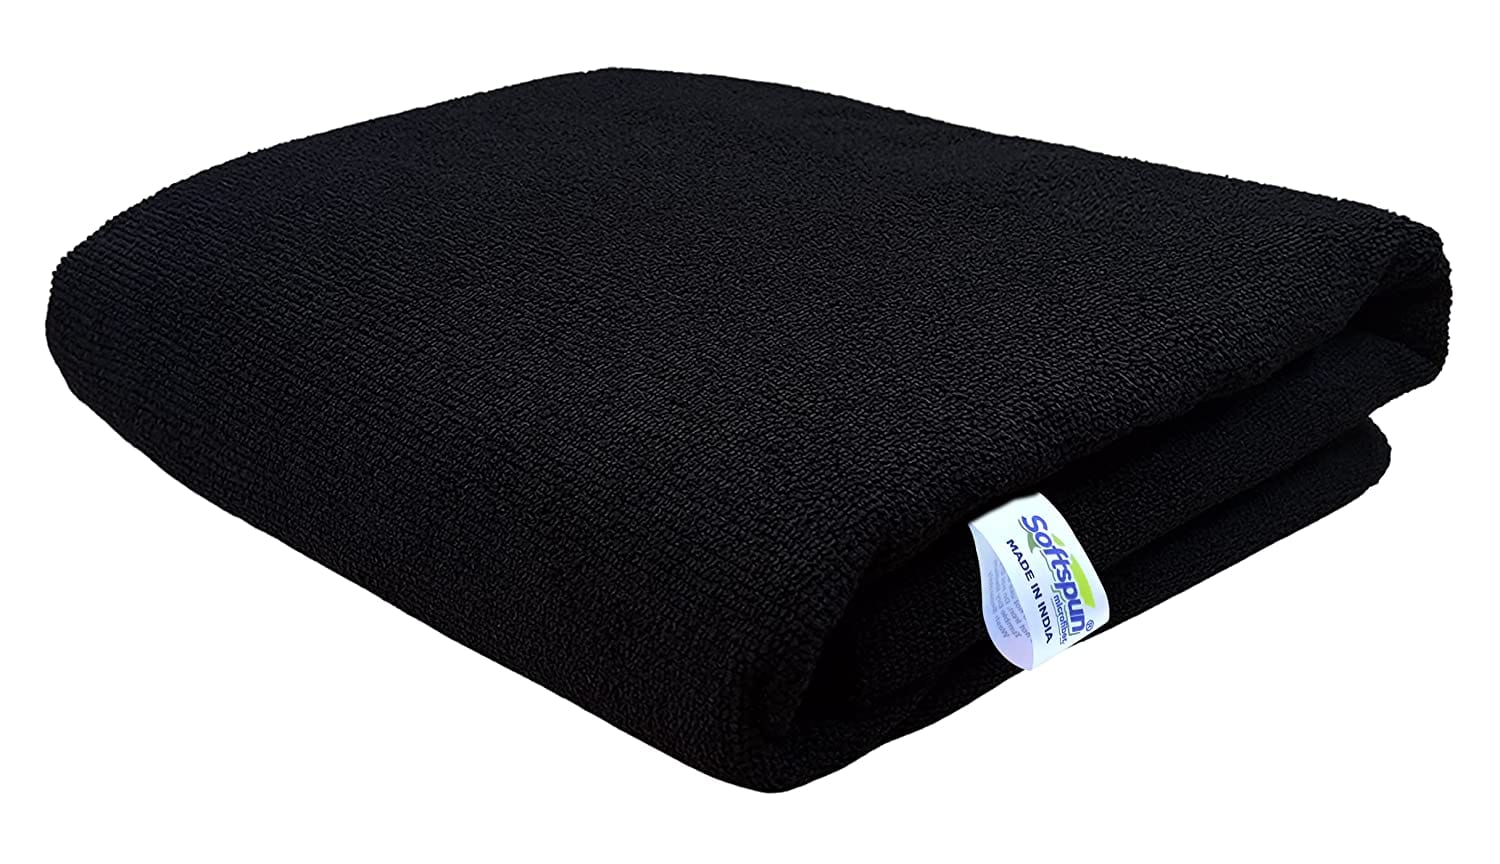 SOFTSPUN Microfiber High Loop Bath & Hair Care Towel , Cms 380 GSM. Super Soft & Comfortable, Quick Drying, Ultra Absorbent in Large Size.